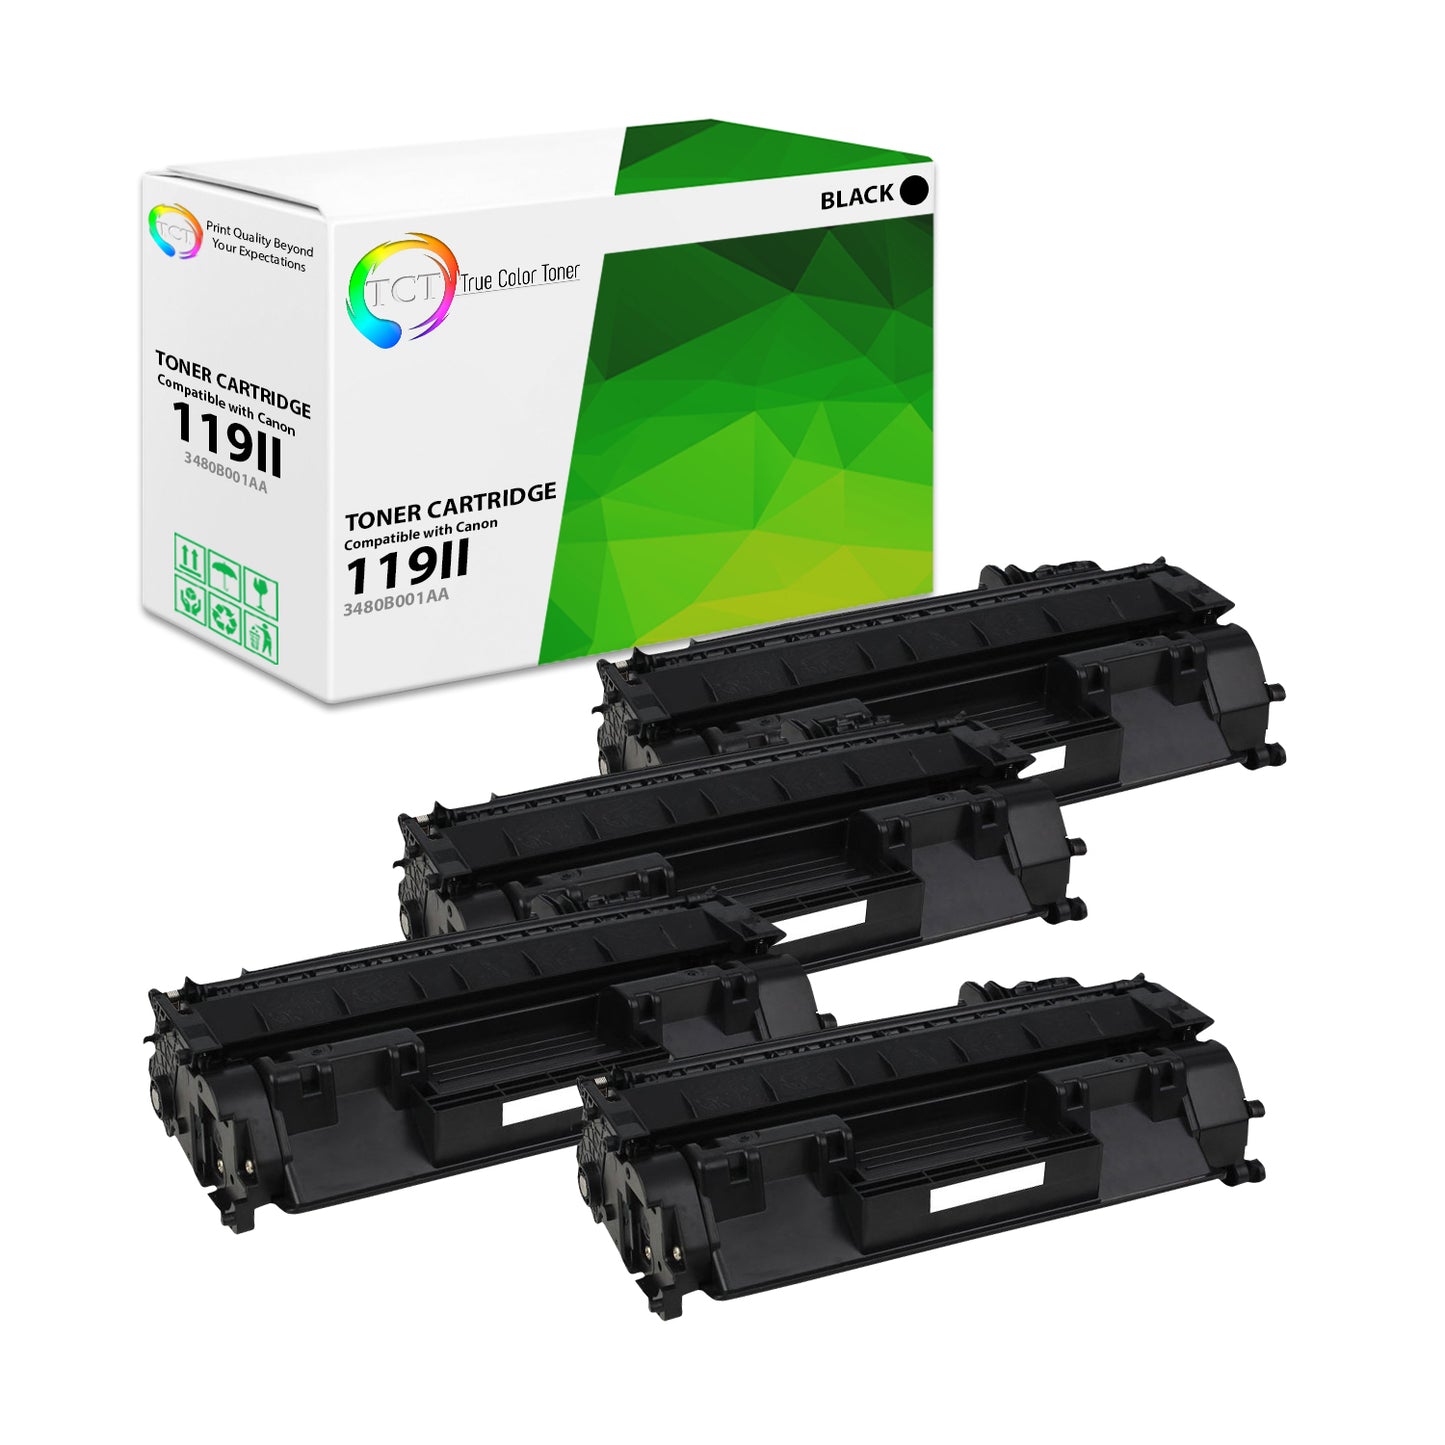 TCT Compatible High Yield Toner Cartridge Replacement for the Canon 119II Series - 4 Pack Black